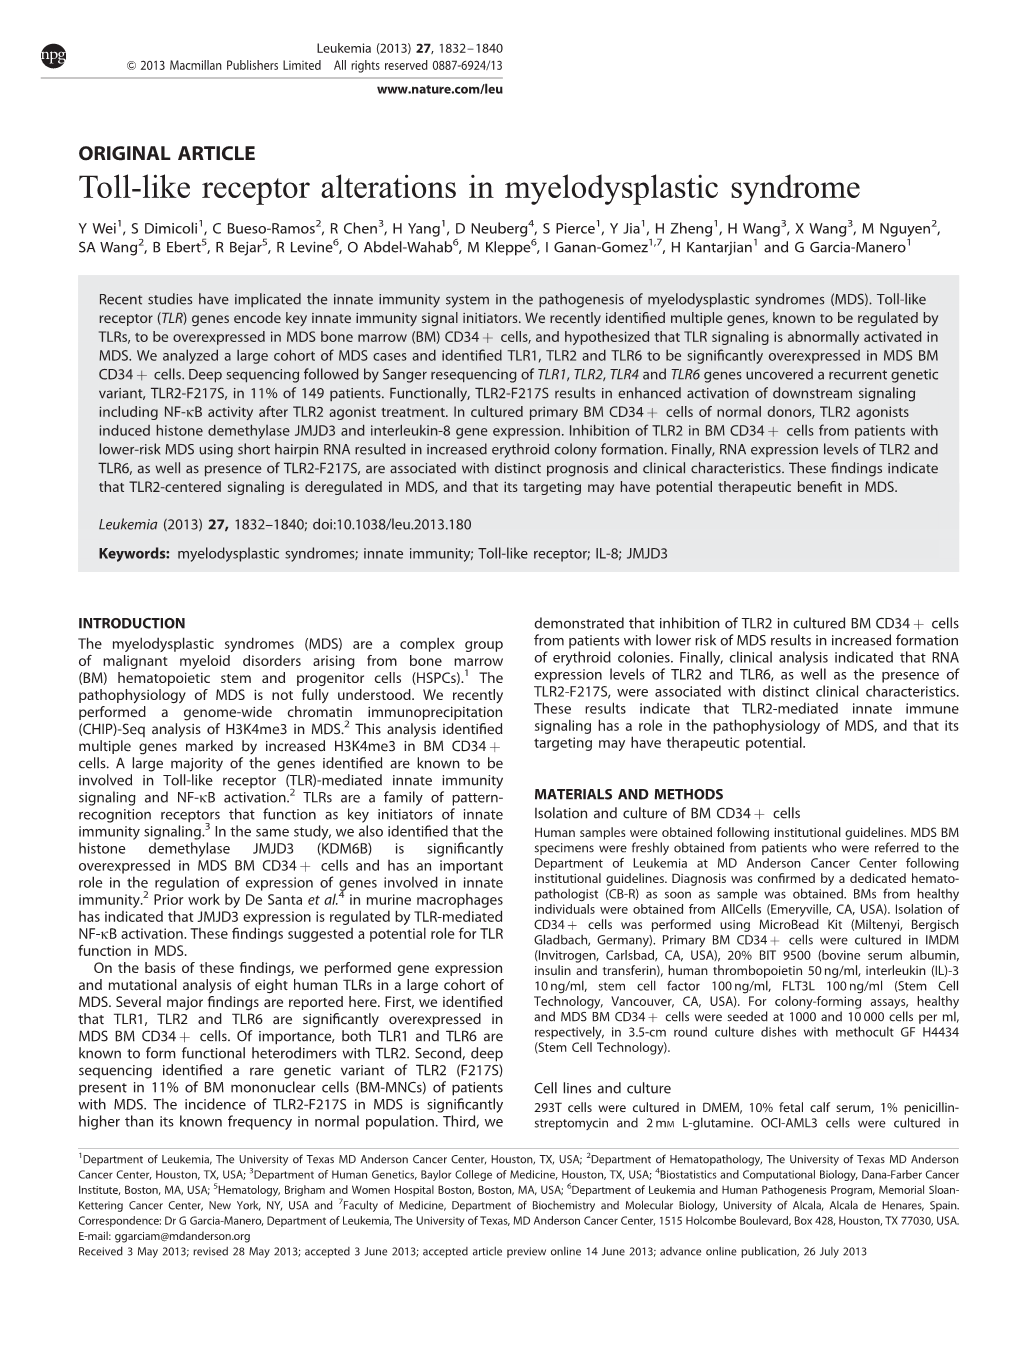 Toll-Like Receptor Alterations in Myelodysplastic Syndrome